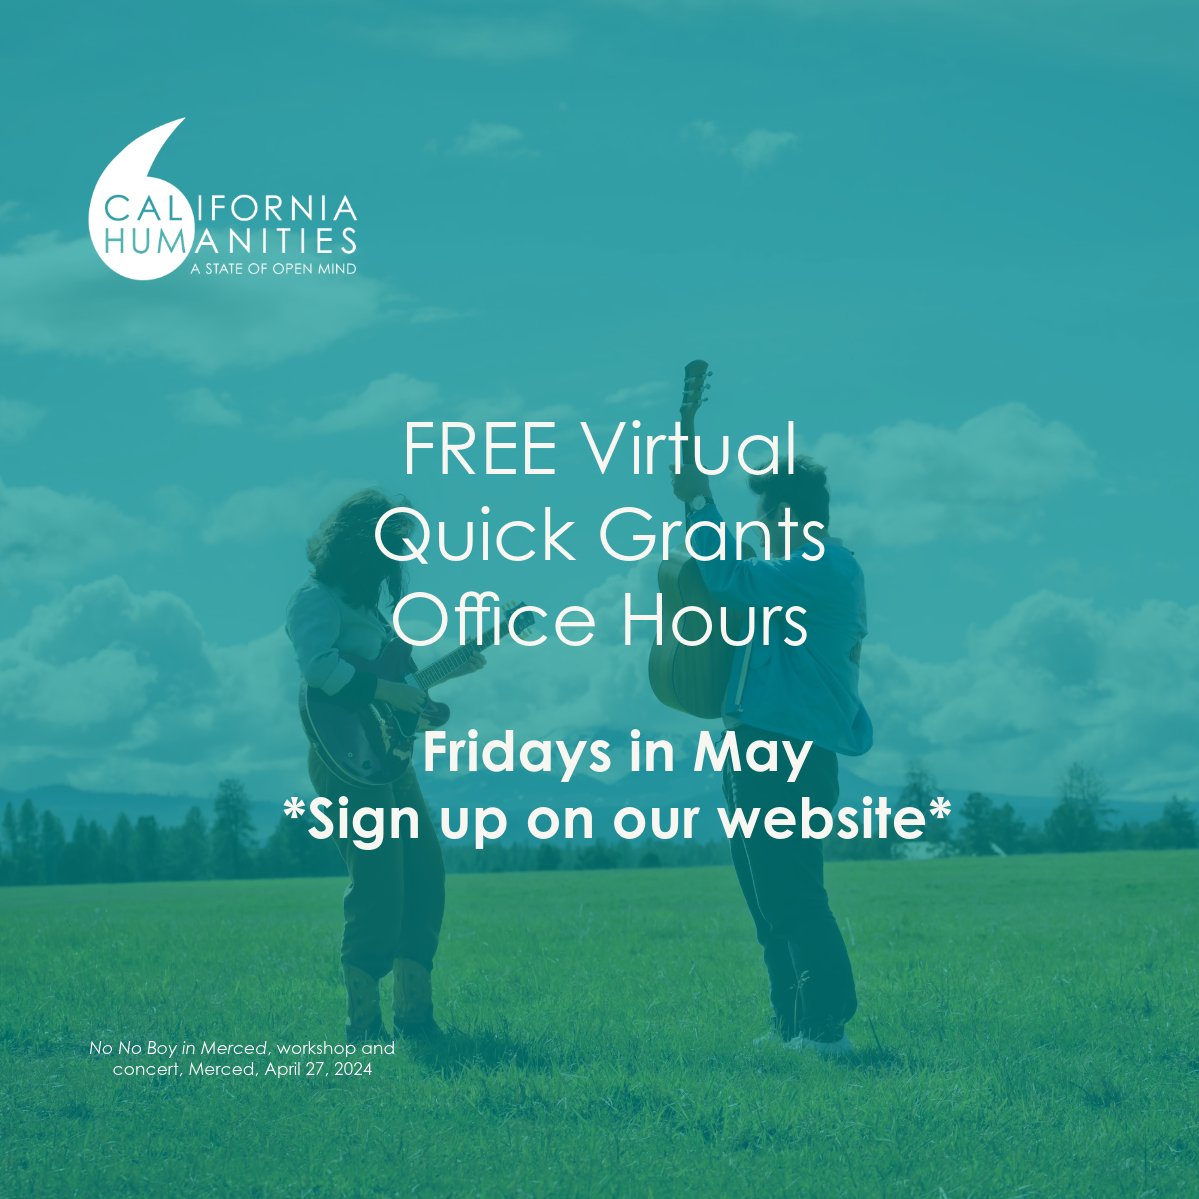 Want to ask questions about your project, applications, and anything else relating to developing a Quick Grant proposal? Sign up for a virtual Office Hour time slot, available Fridays throughout May: bit.ly/3xZbldf #HumanitiesforAll #infosession